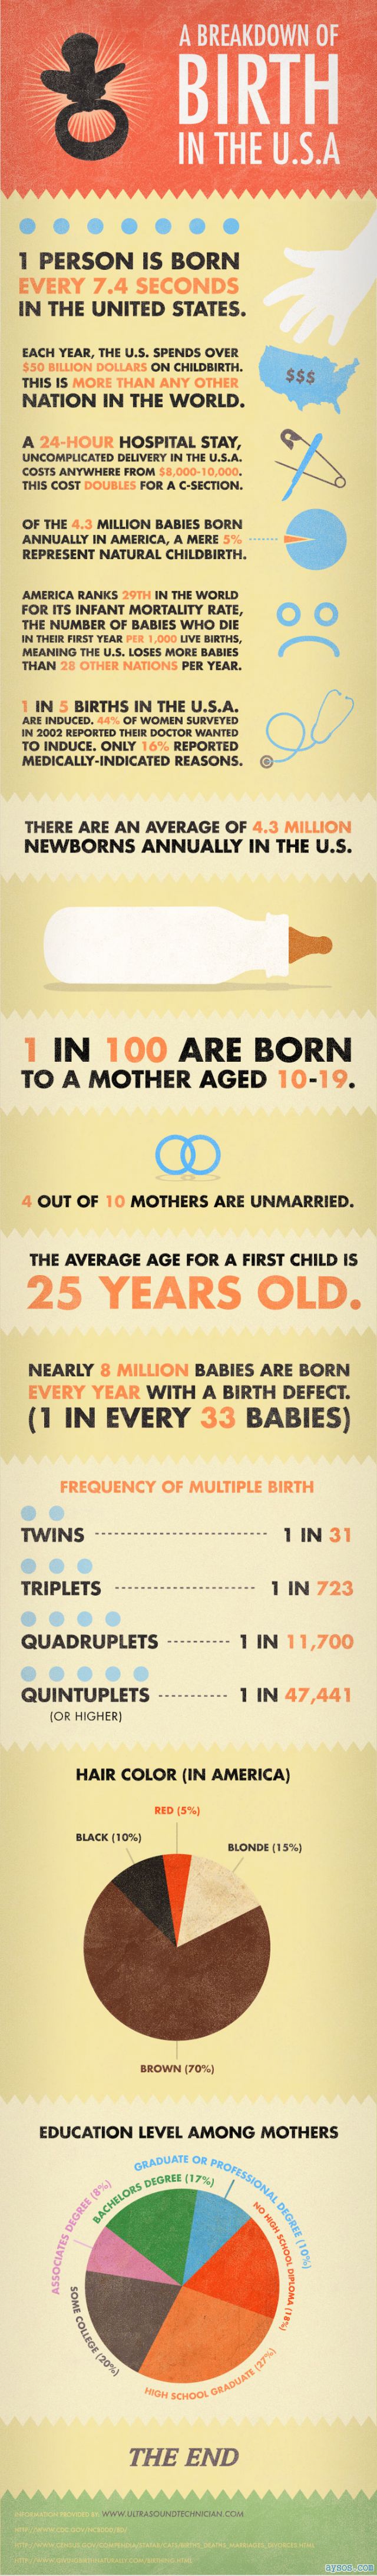 Infographic about birth facts